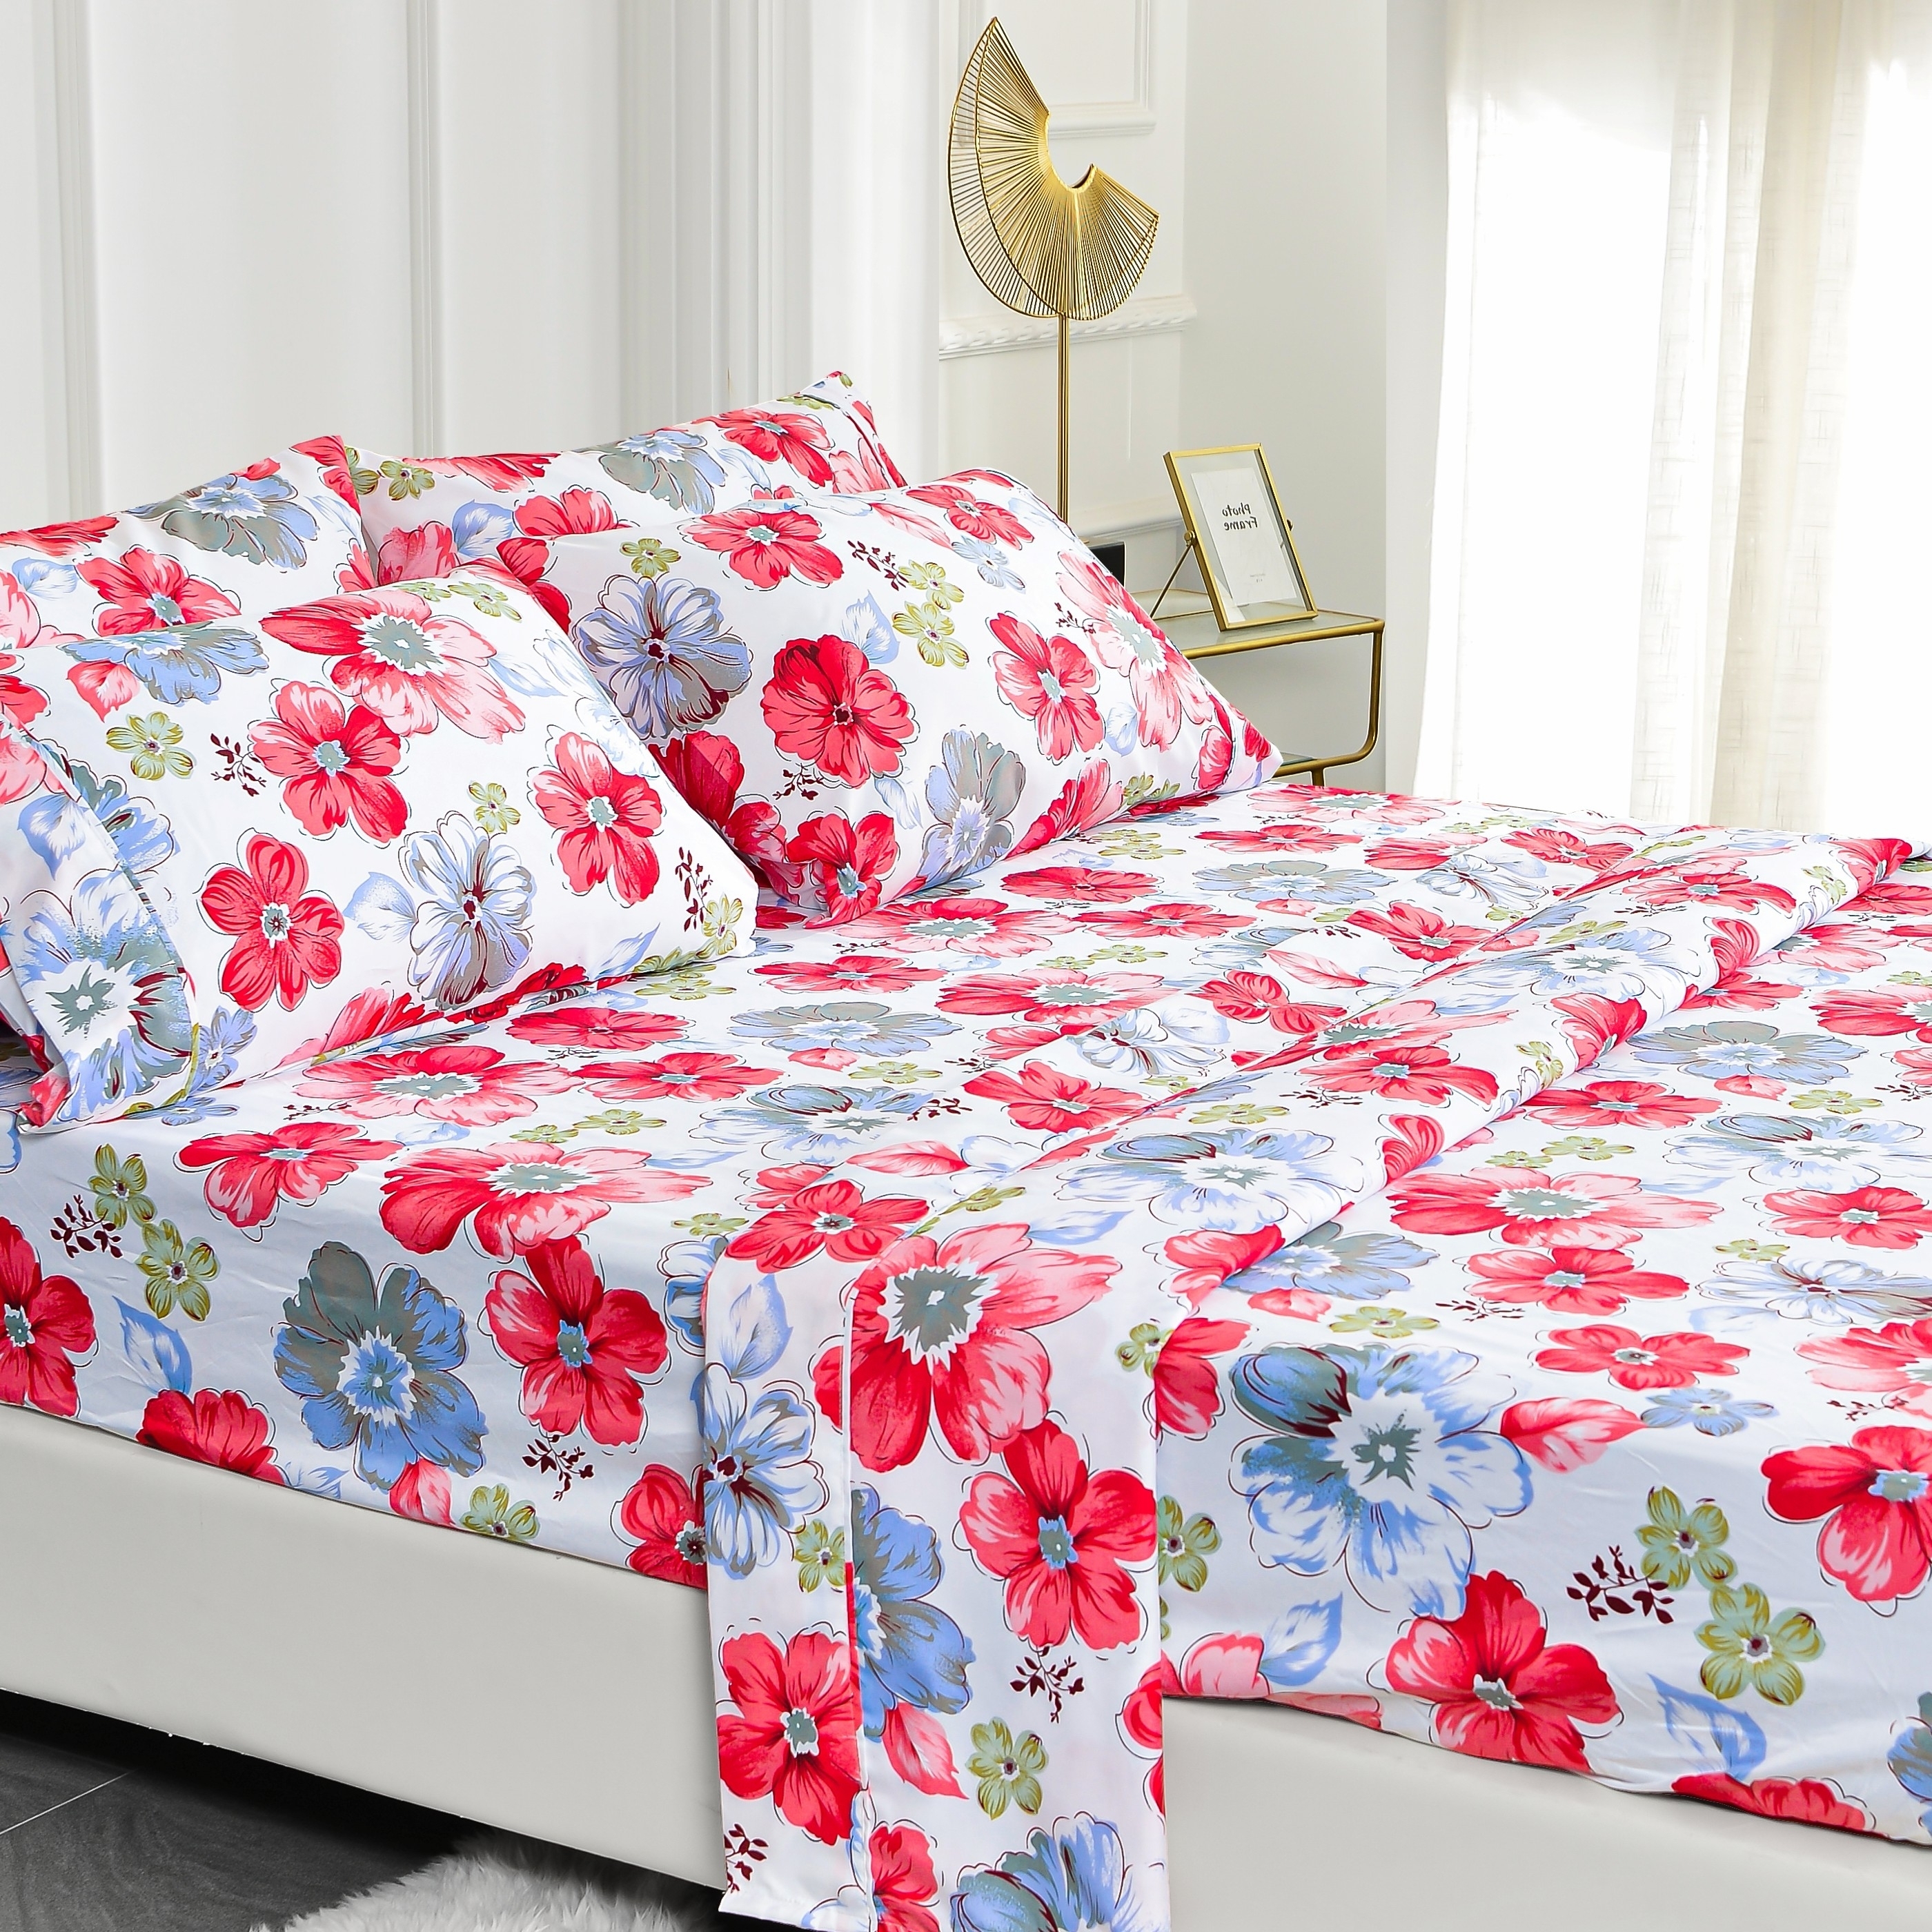 American Home Collection Ultra Soft 4-6 Piece Red Floral Printed Bed Sheet Set - King